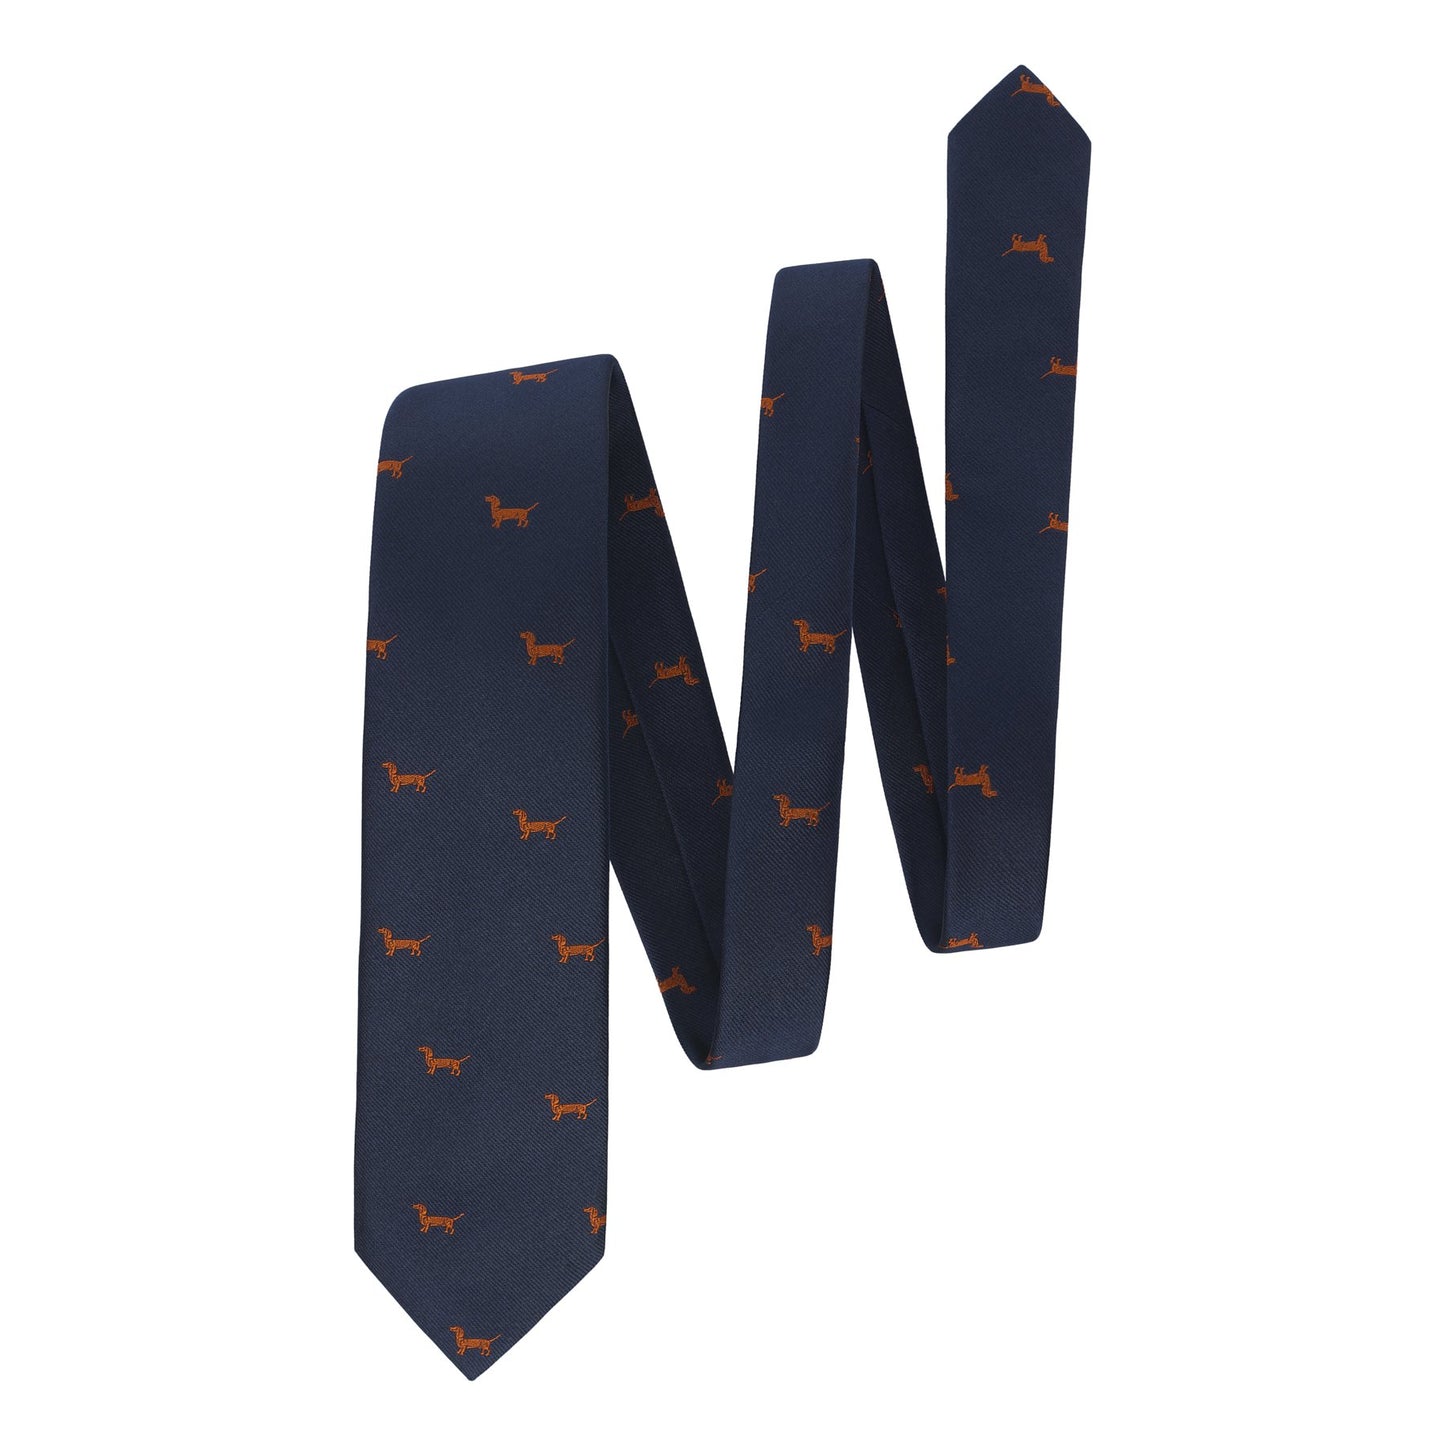 Drake's Embroidered Woven Silk Navy Tie with Design - SARTALE